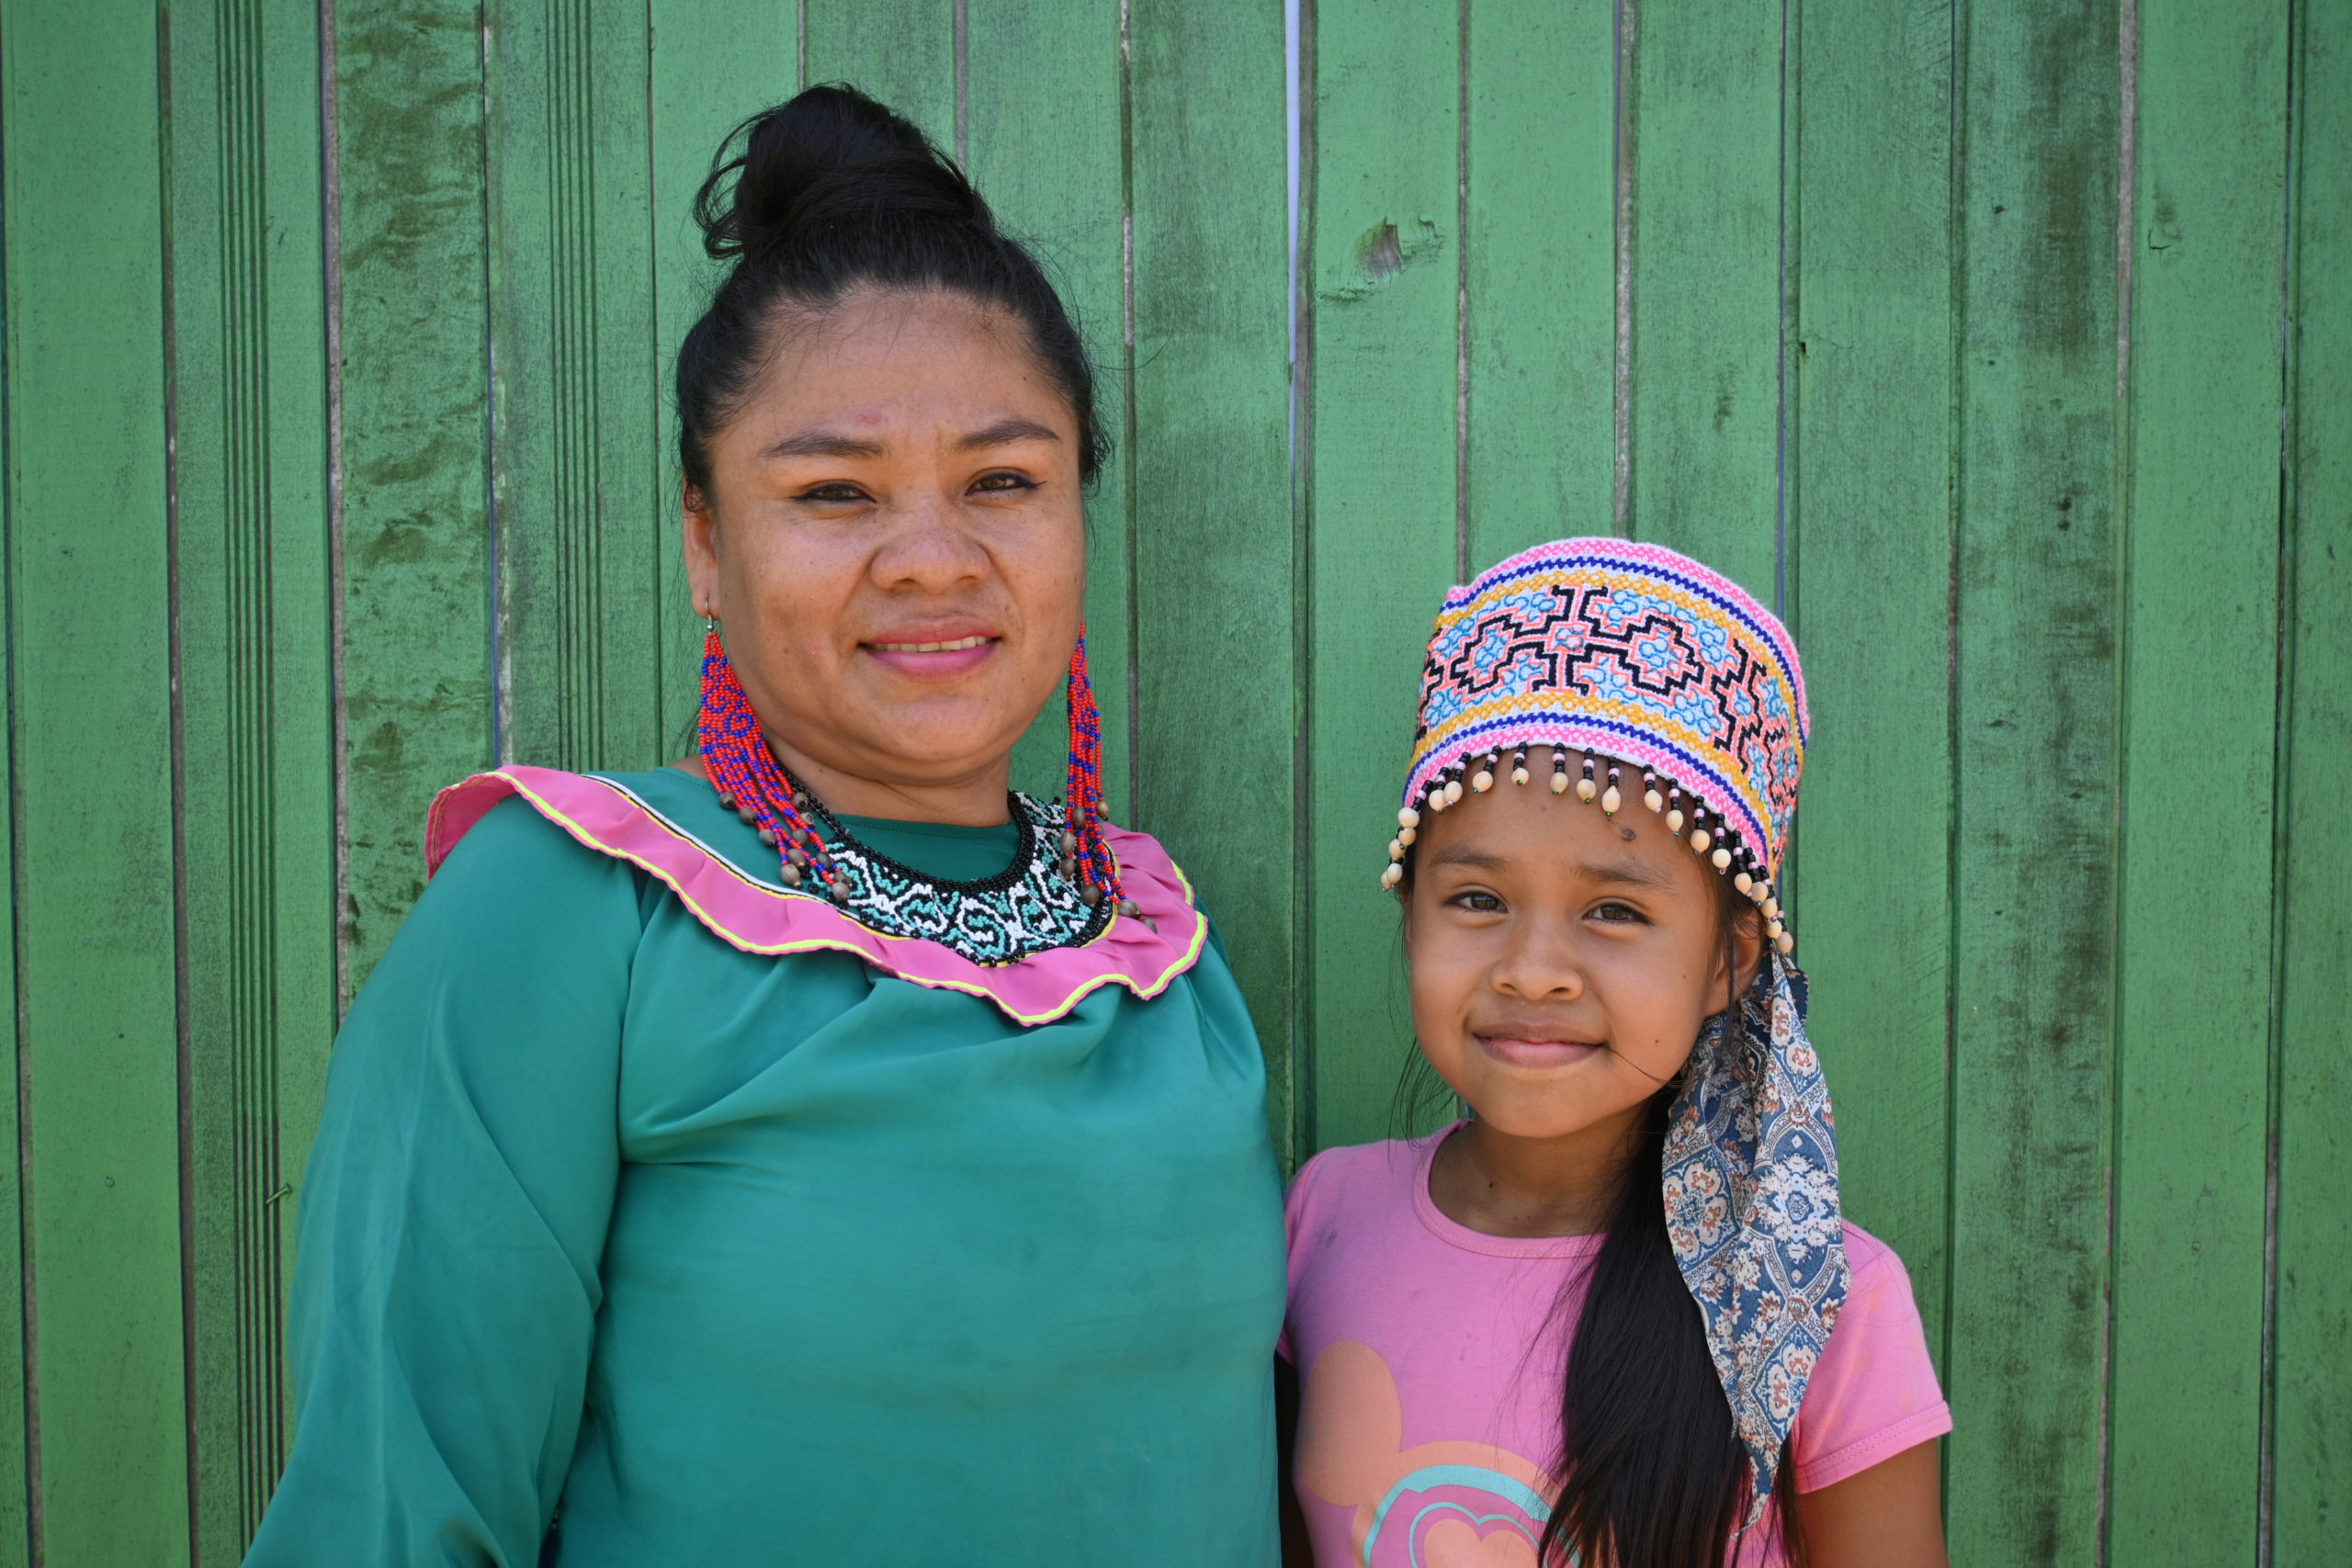 Forest Patrol Instructor Mirian Sanchez poses with her daughter, Abigail, in front of a green wall.